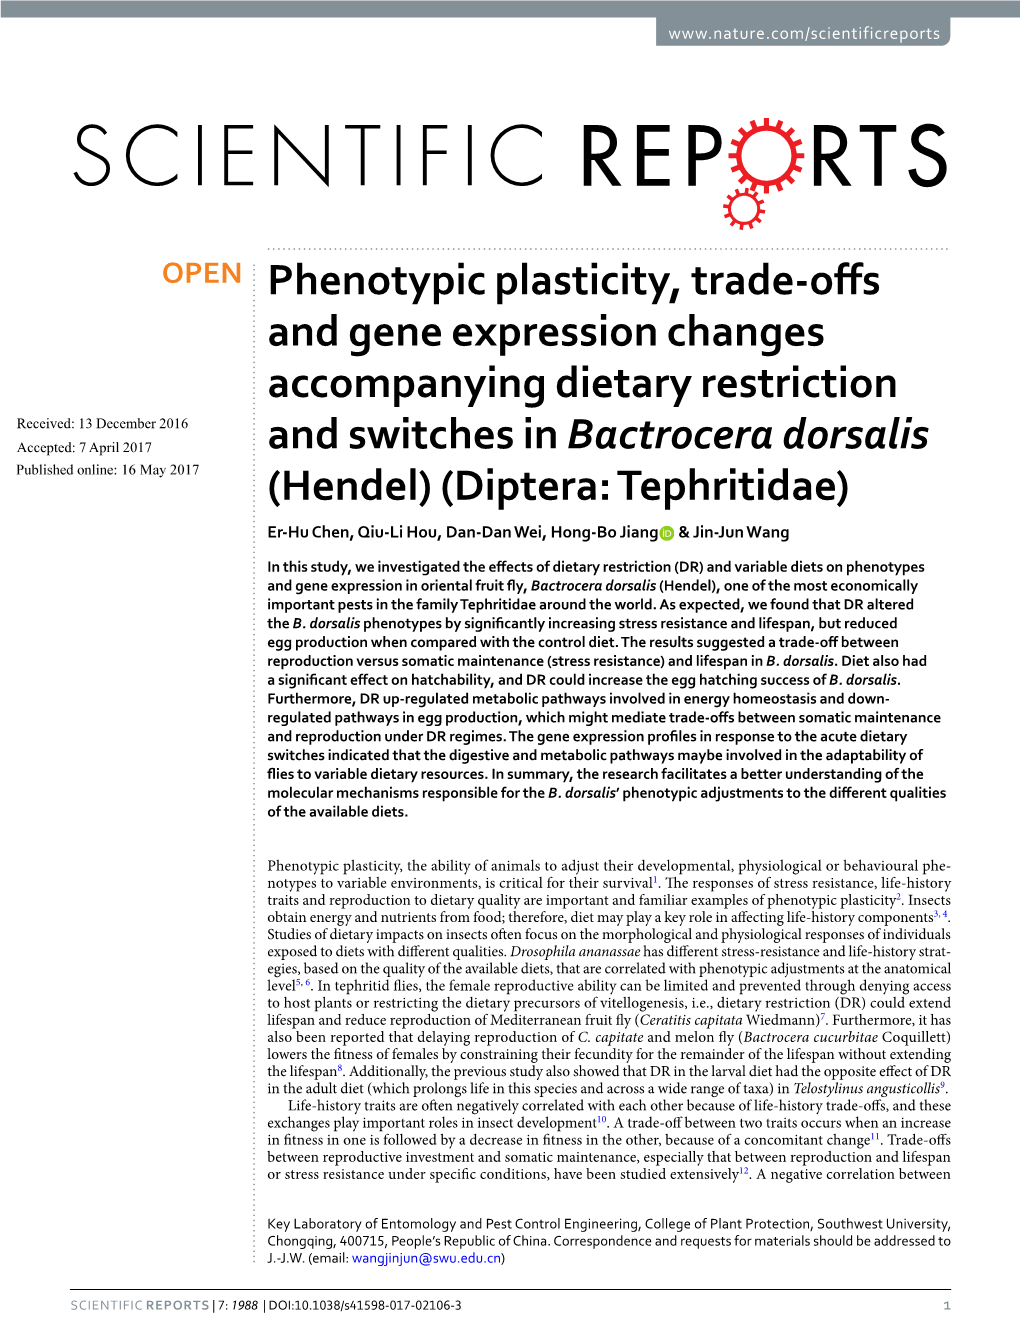 Phenotypic Plasticity, Trade-Offs and Gene Expression Changes